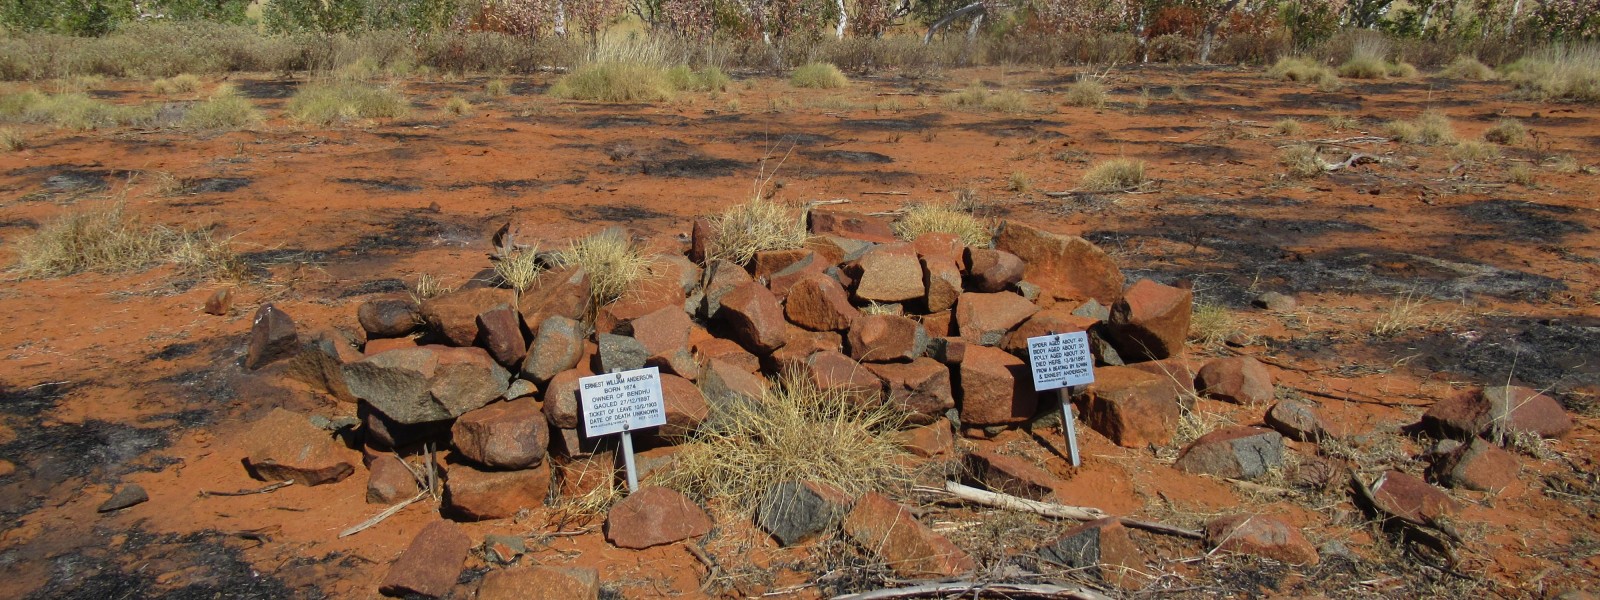 This is an image of the graves of SPIDER, BIDDY and POLLY at Bendhu